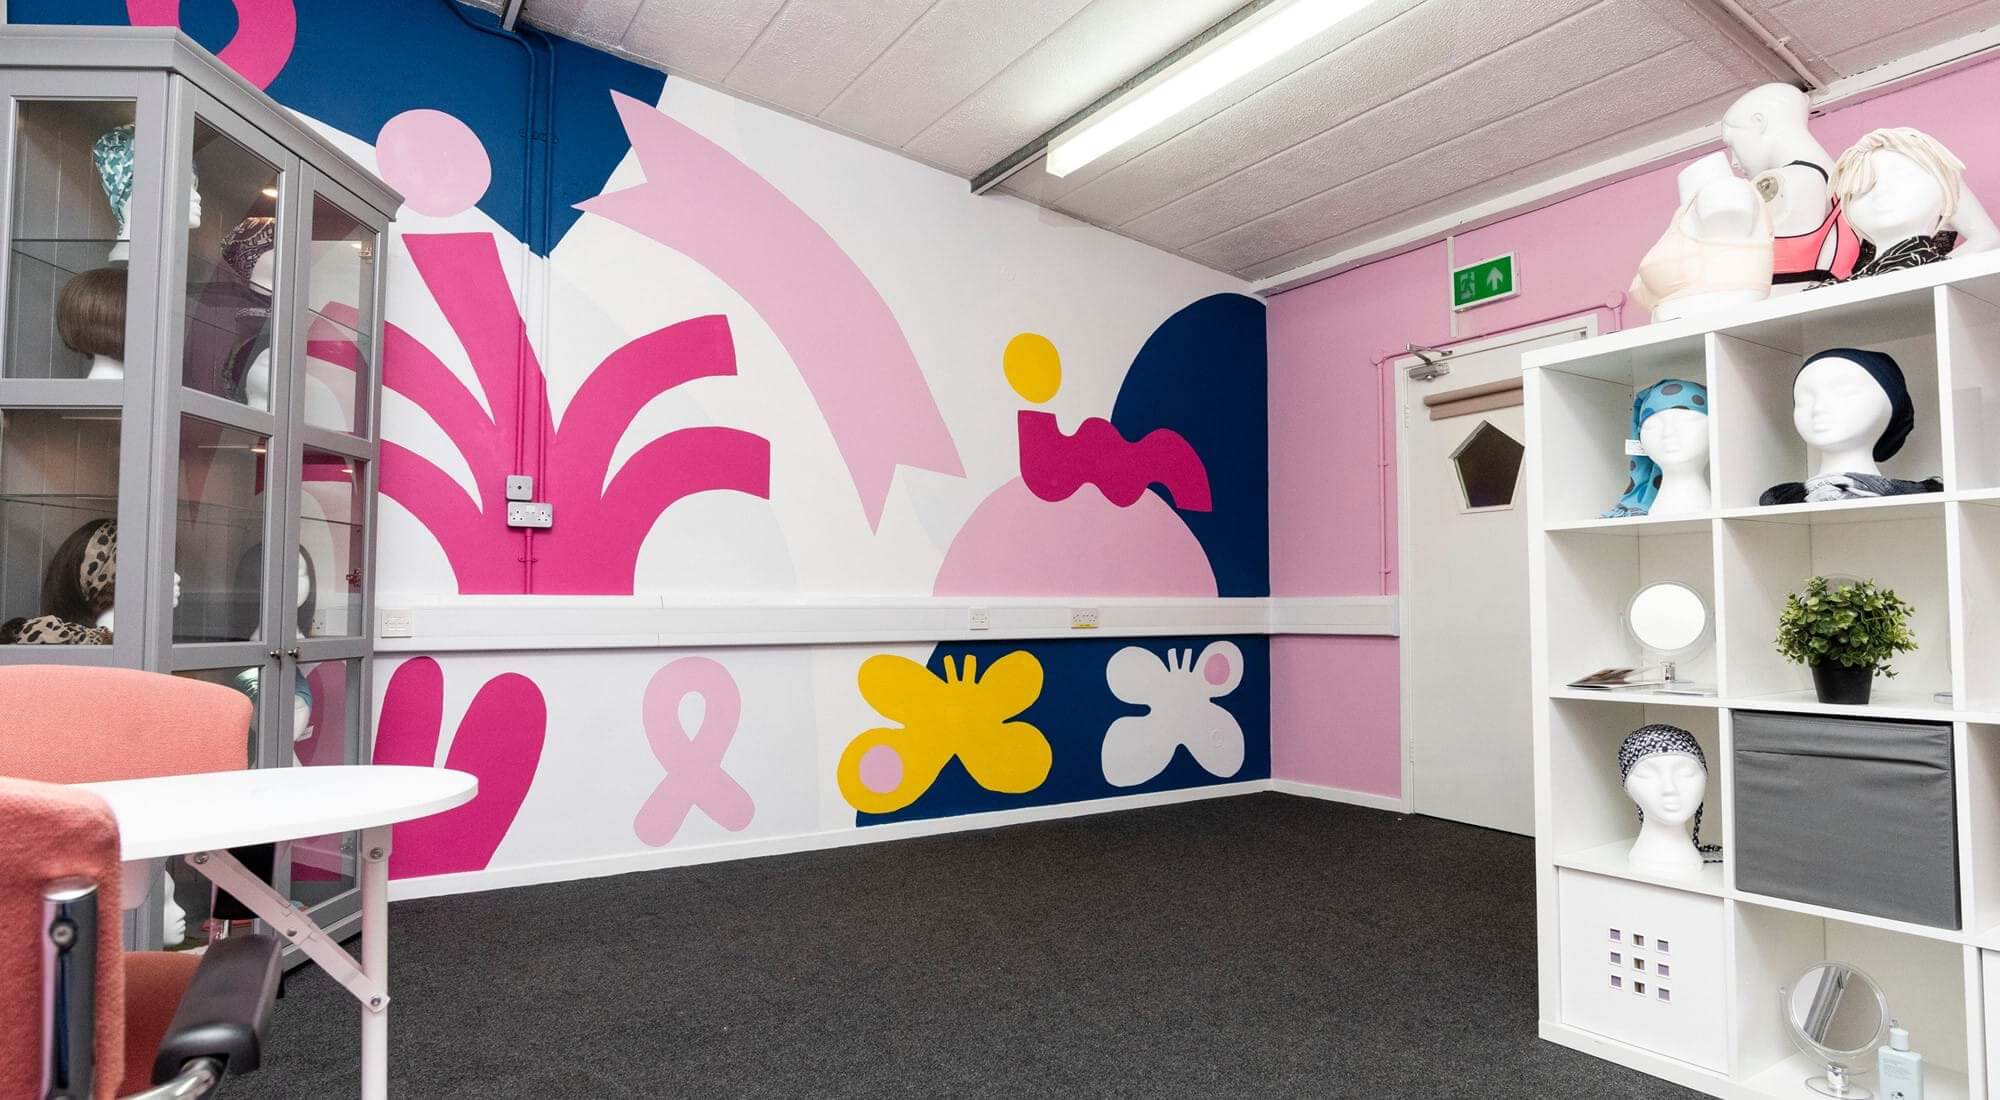 Birmingham cancer support centre given a colourful makeover